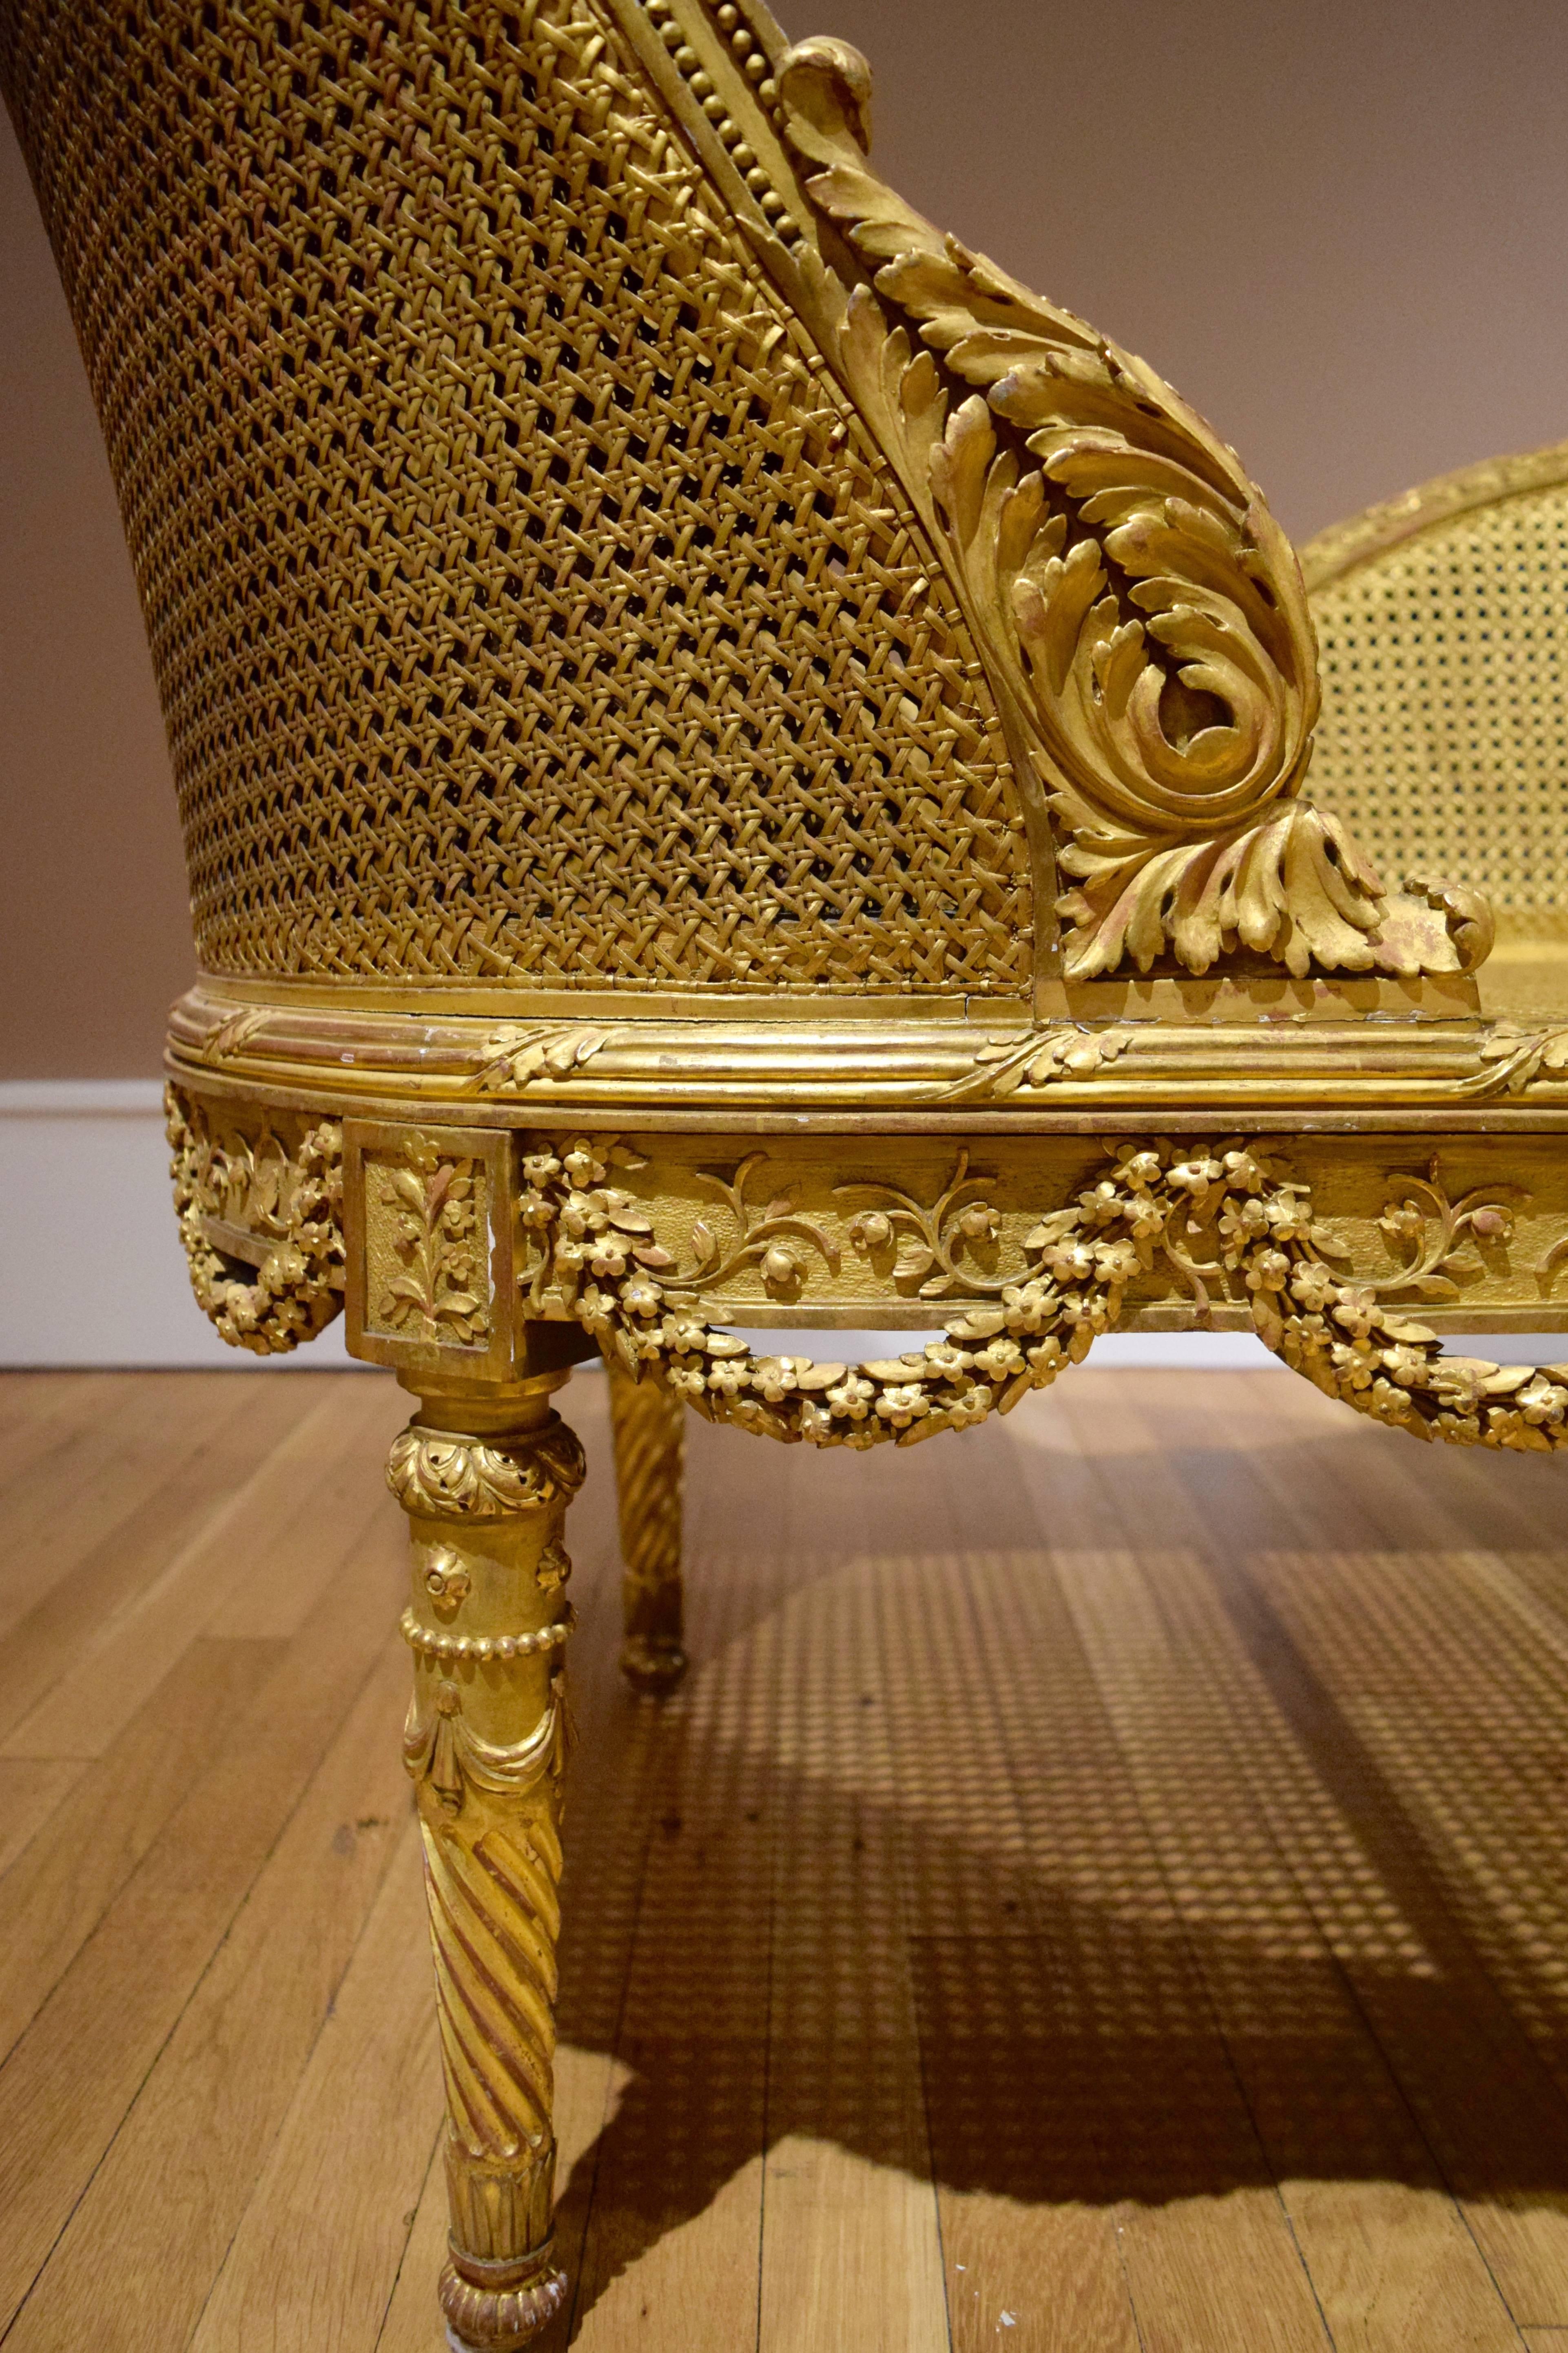 Early 20th Century Belle Epoque Giltwood Chaise Longue Circa 1900